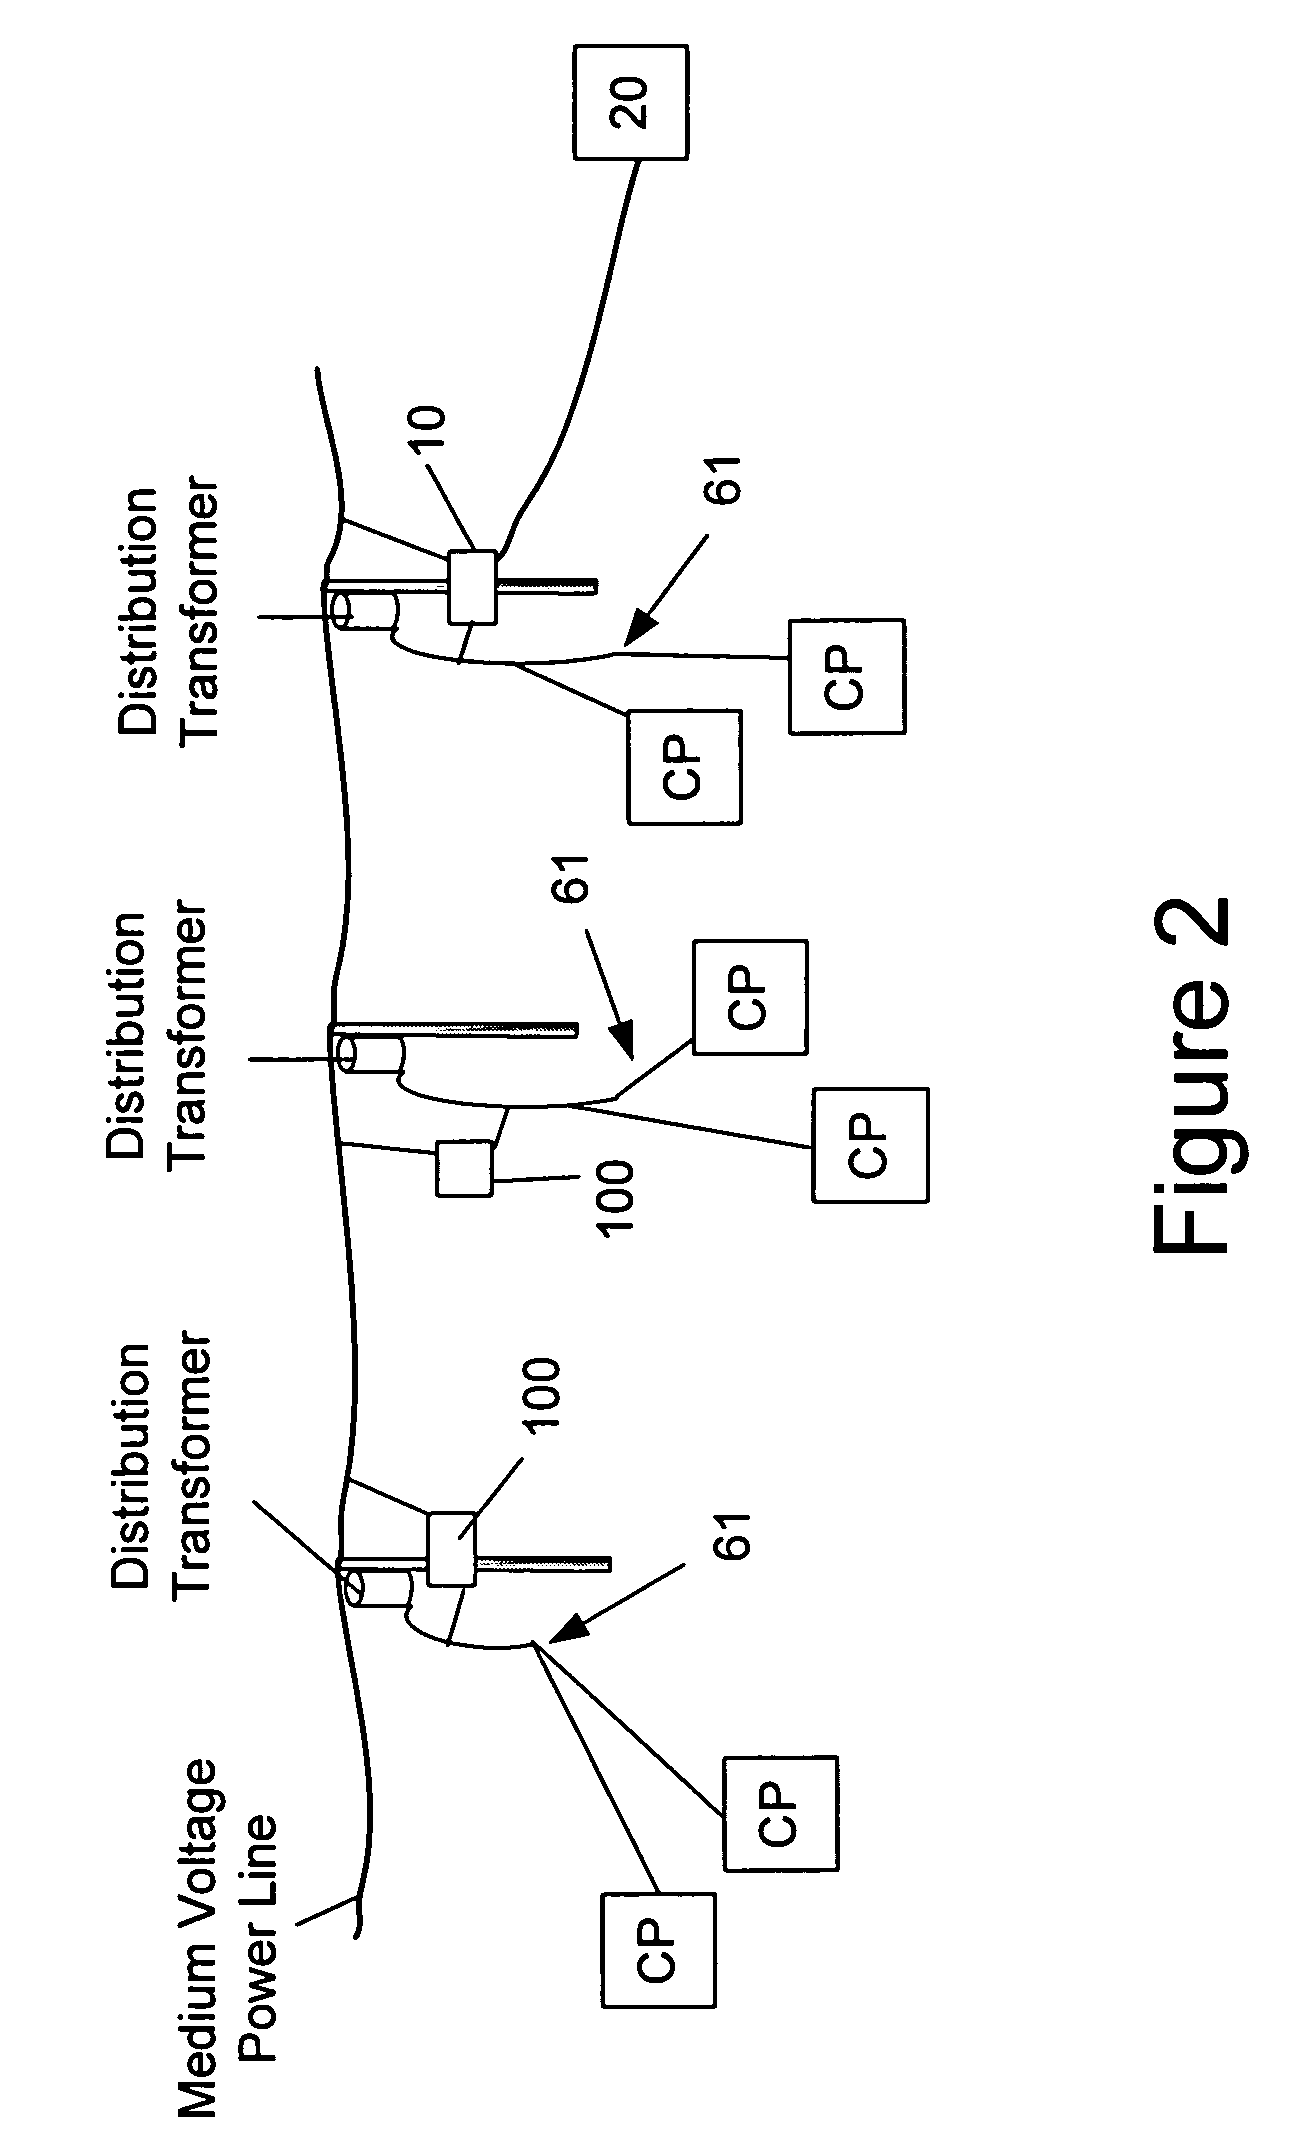 Power line communications system and method